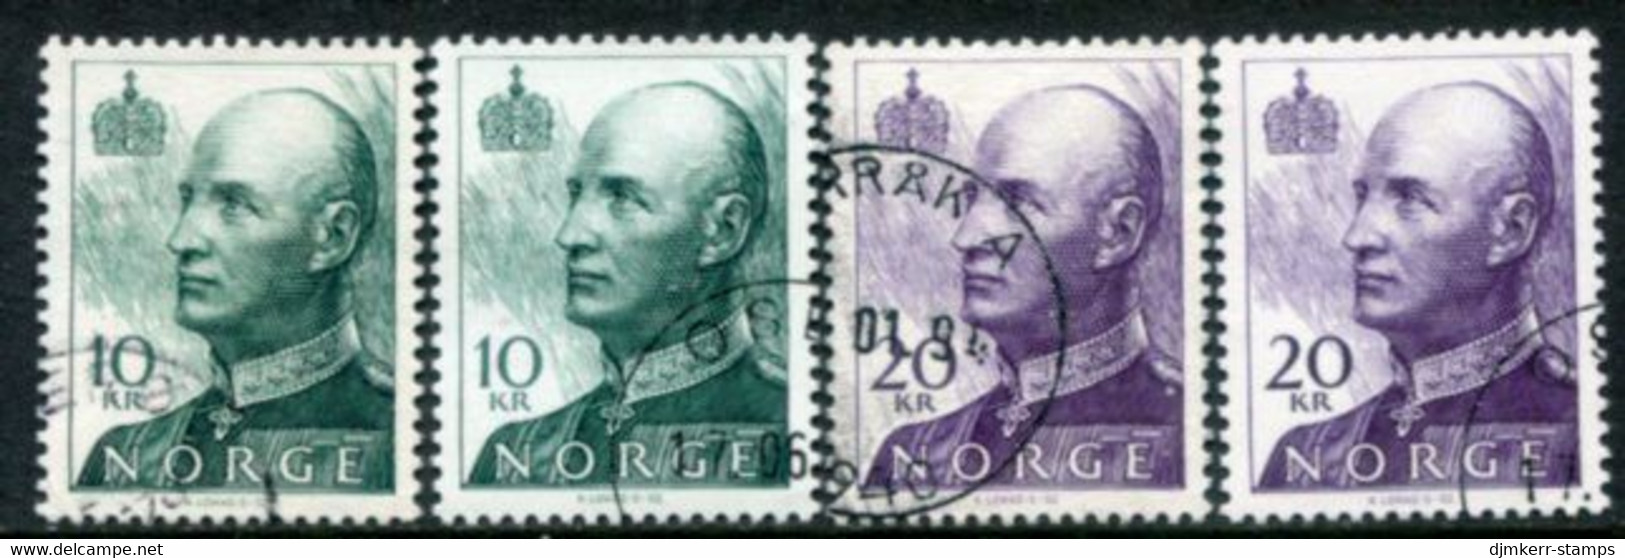 NORWAY 1993) Definitive: King Harald V 10 Kr. 20 Kr. On Ordinary And Phosphor Papers Used.   Michel 1131-32x,y - Used Stamps